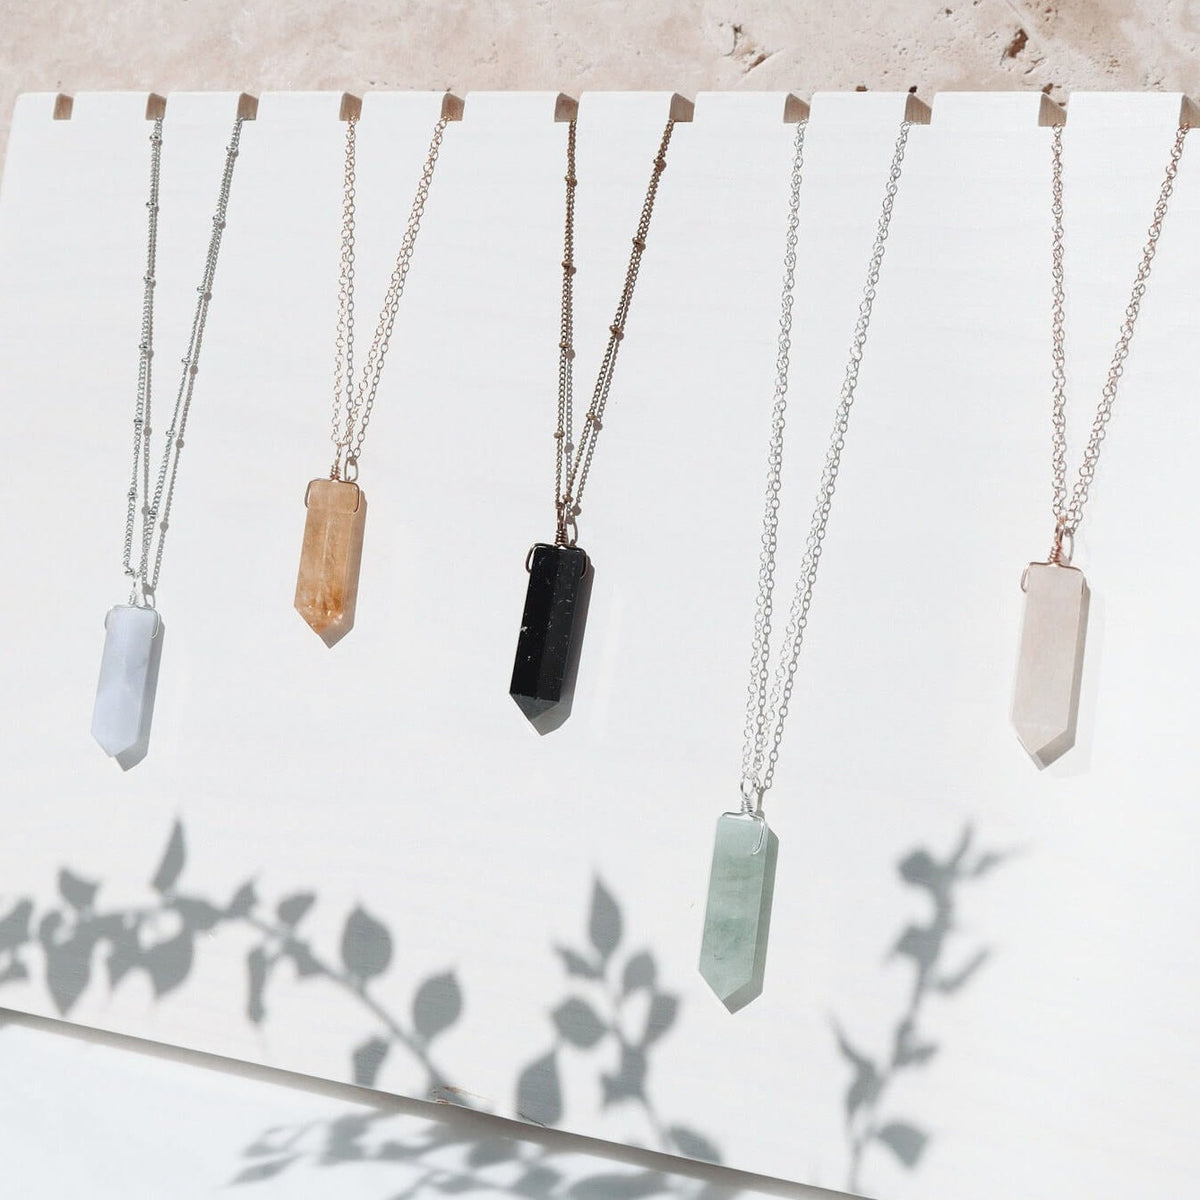 Large Crystal Point Necklace - Bronze - 14K Gold Fill - Sterling Silver - Stainless Steel - 14K Rose Gold Fill - Luna Tide Handmade Jewellery